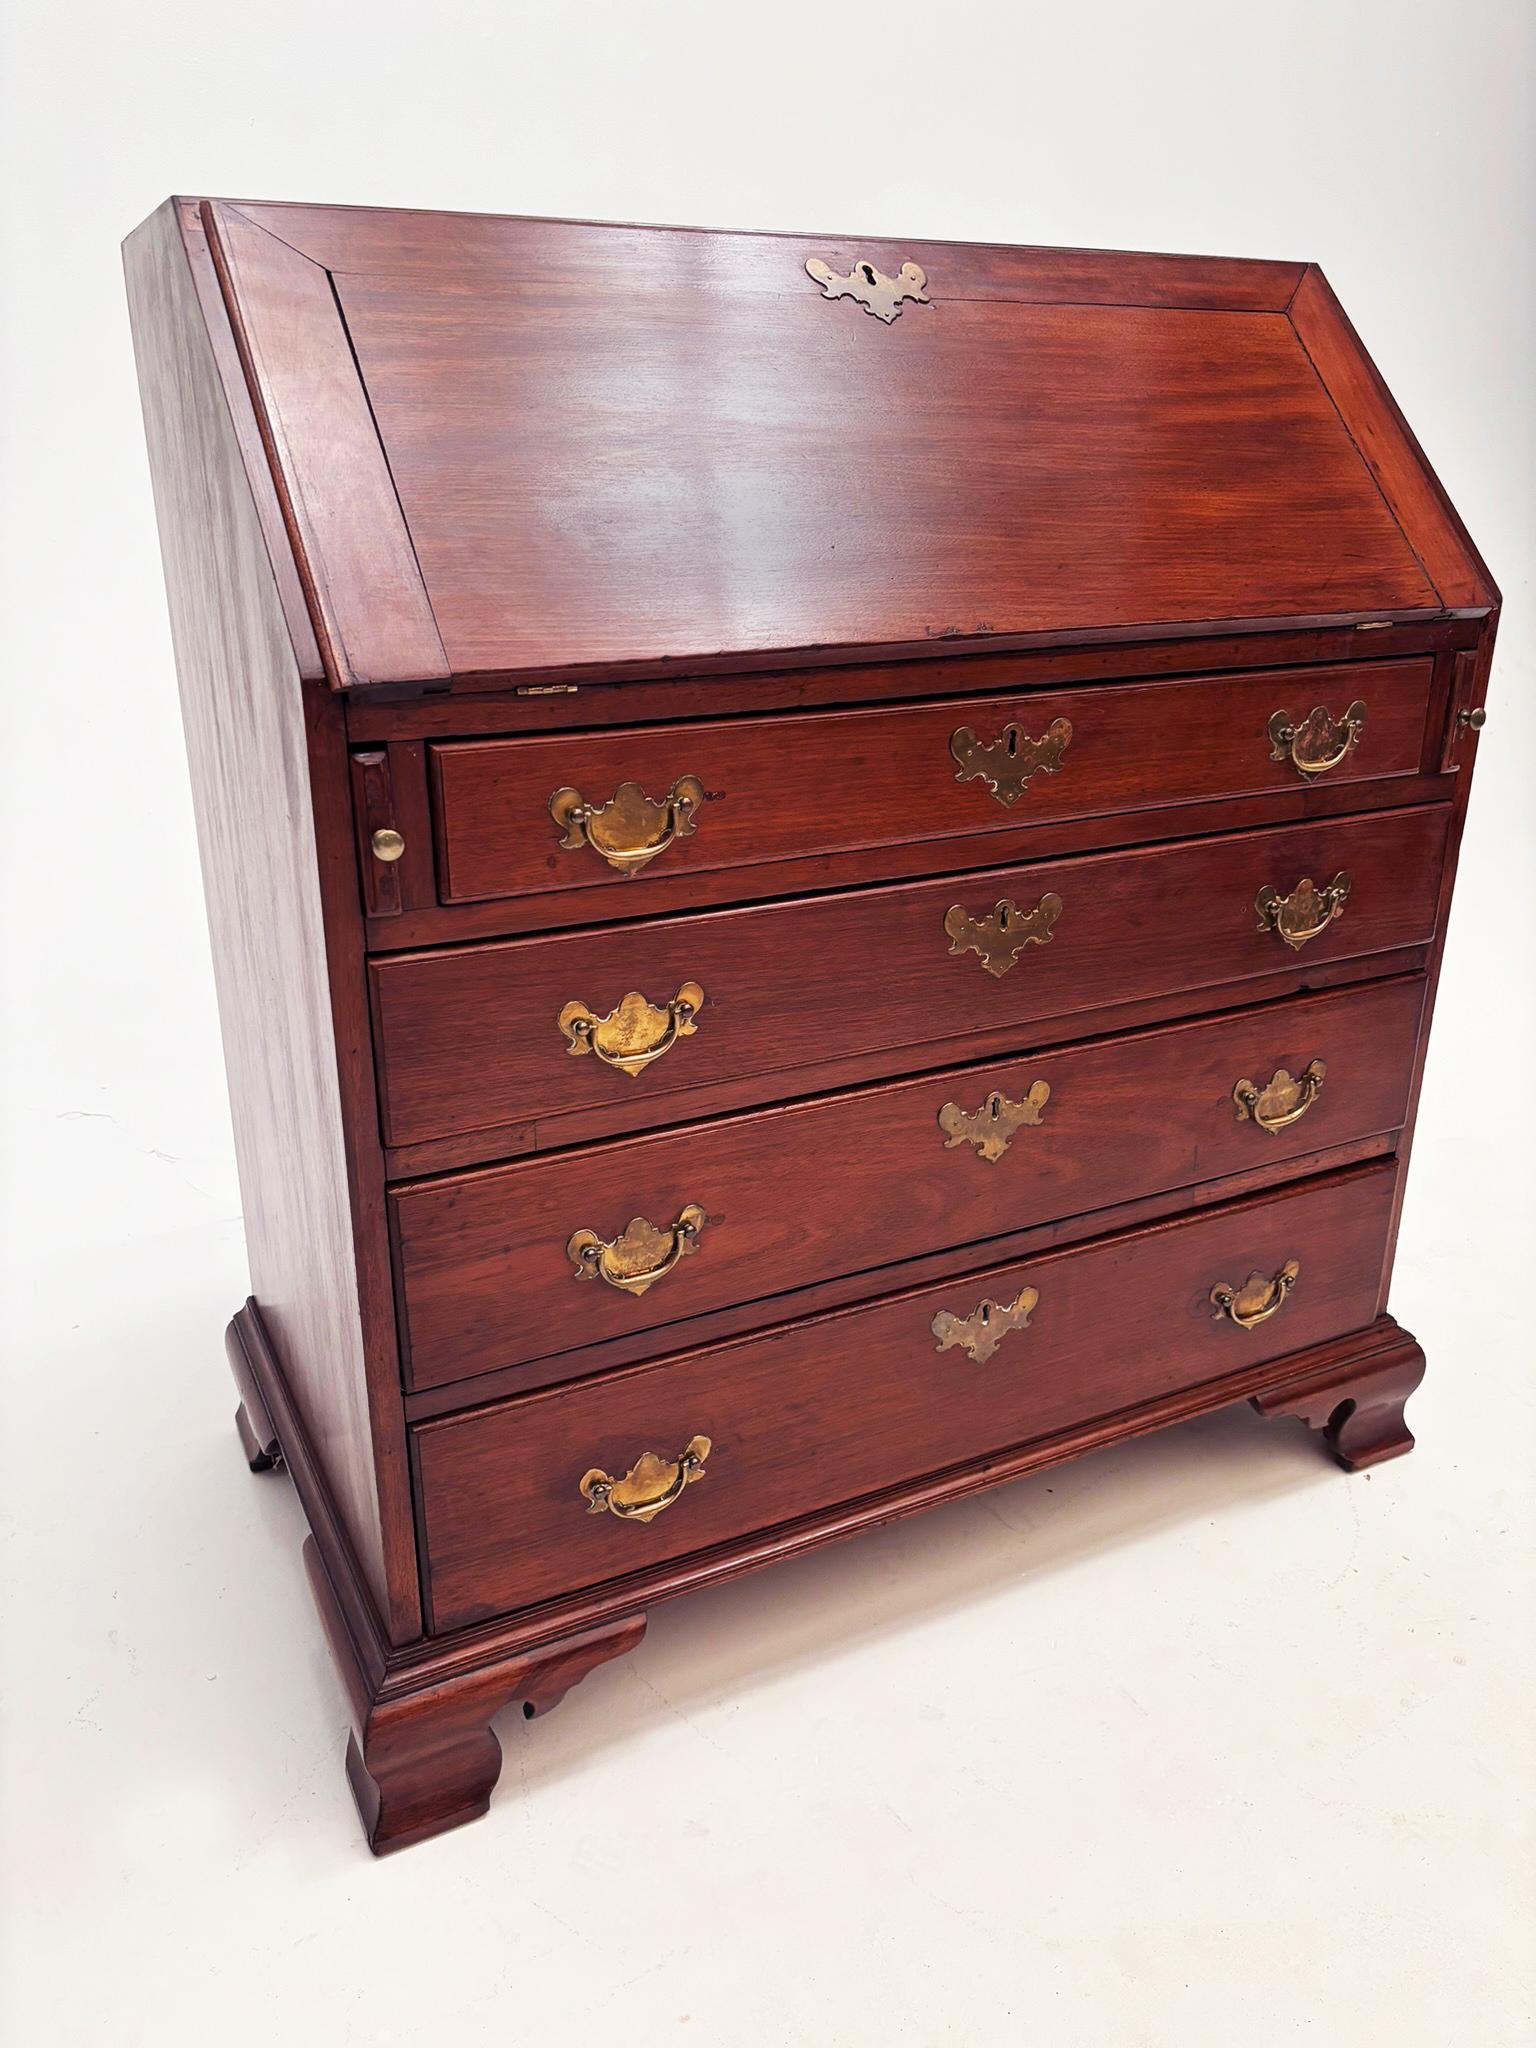 This early 19th century Georgian drop-front desk is reflective of an era when form and function paired beautifully to bring people amazing pieces. Made from gorgeous walnut this desk is comprised of 5 stacking drawers, constructed of oak,  the top